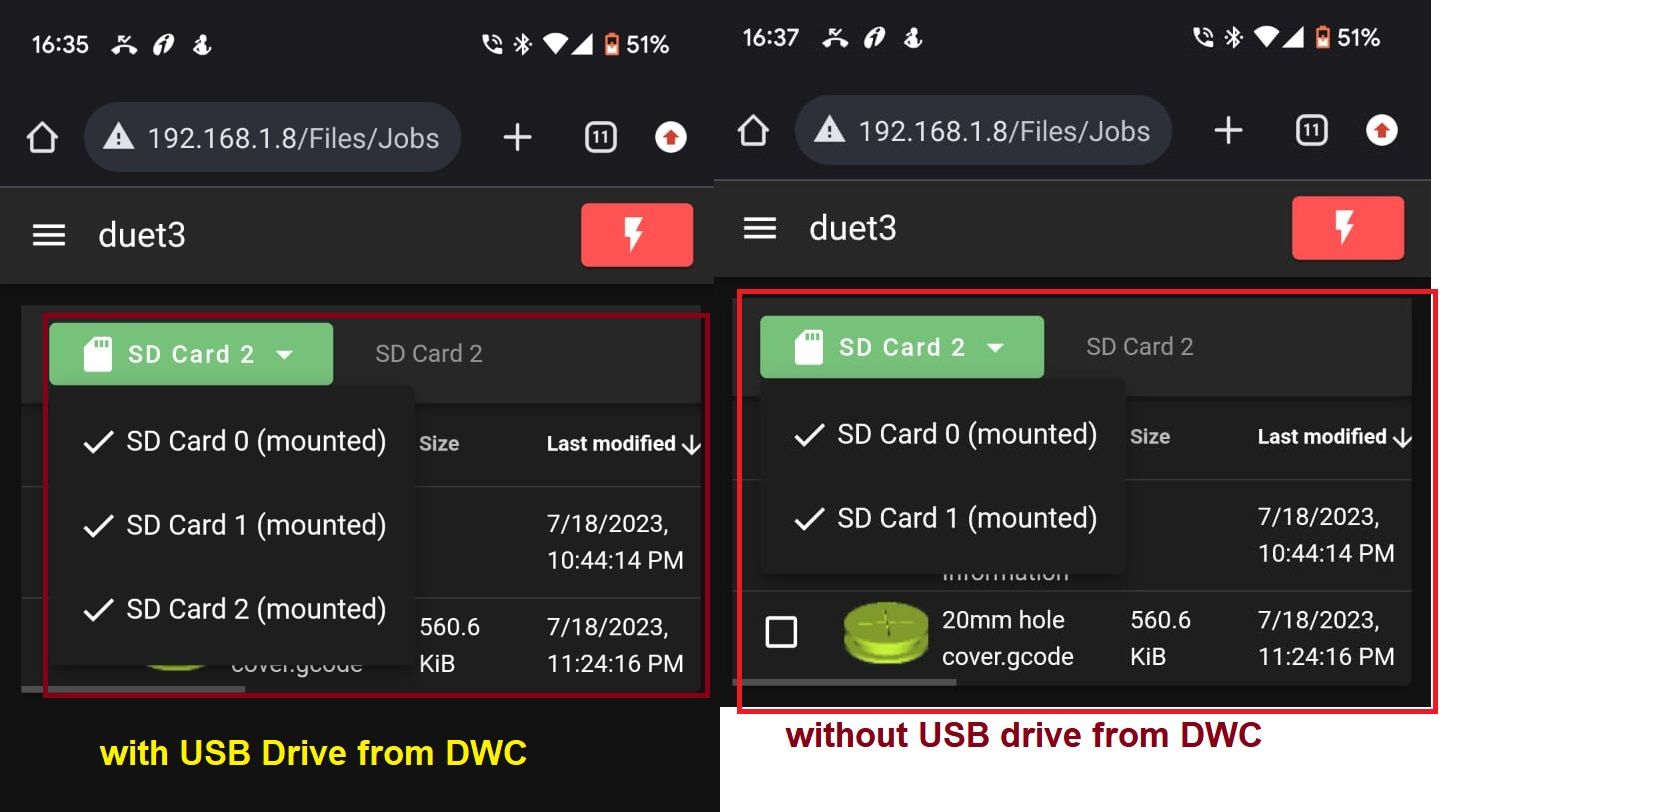 With-Without Pen drive.jpeg